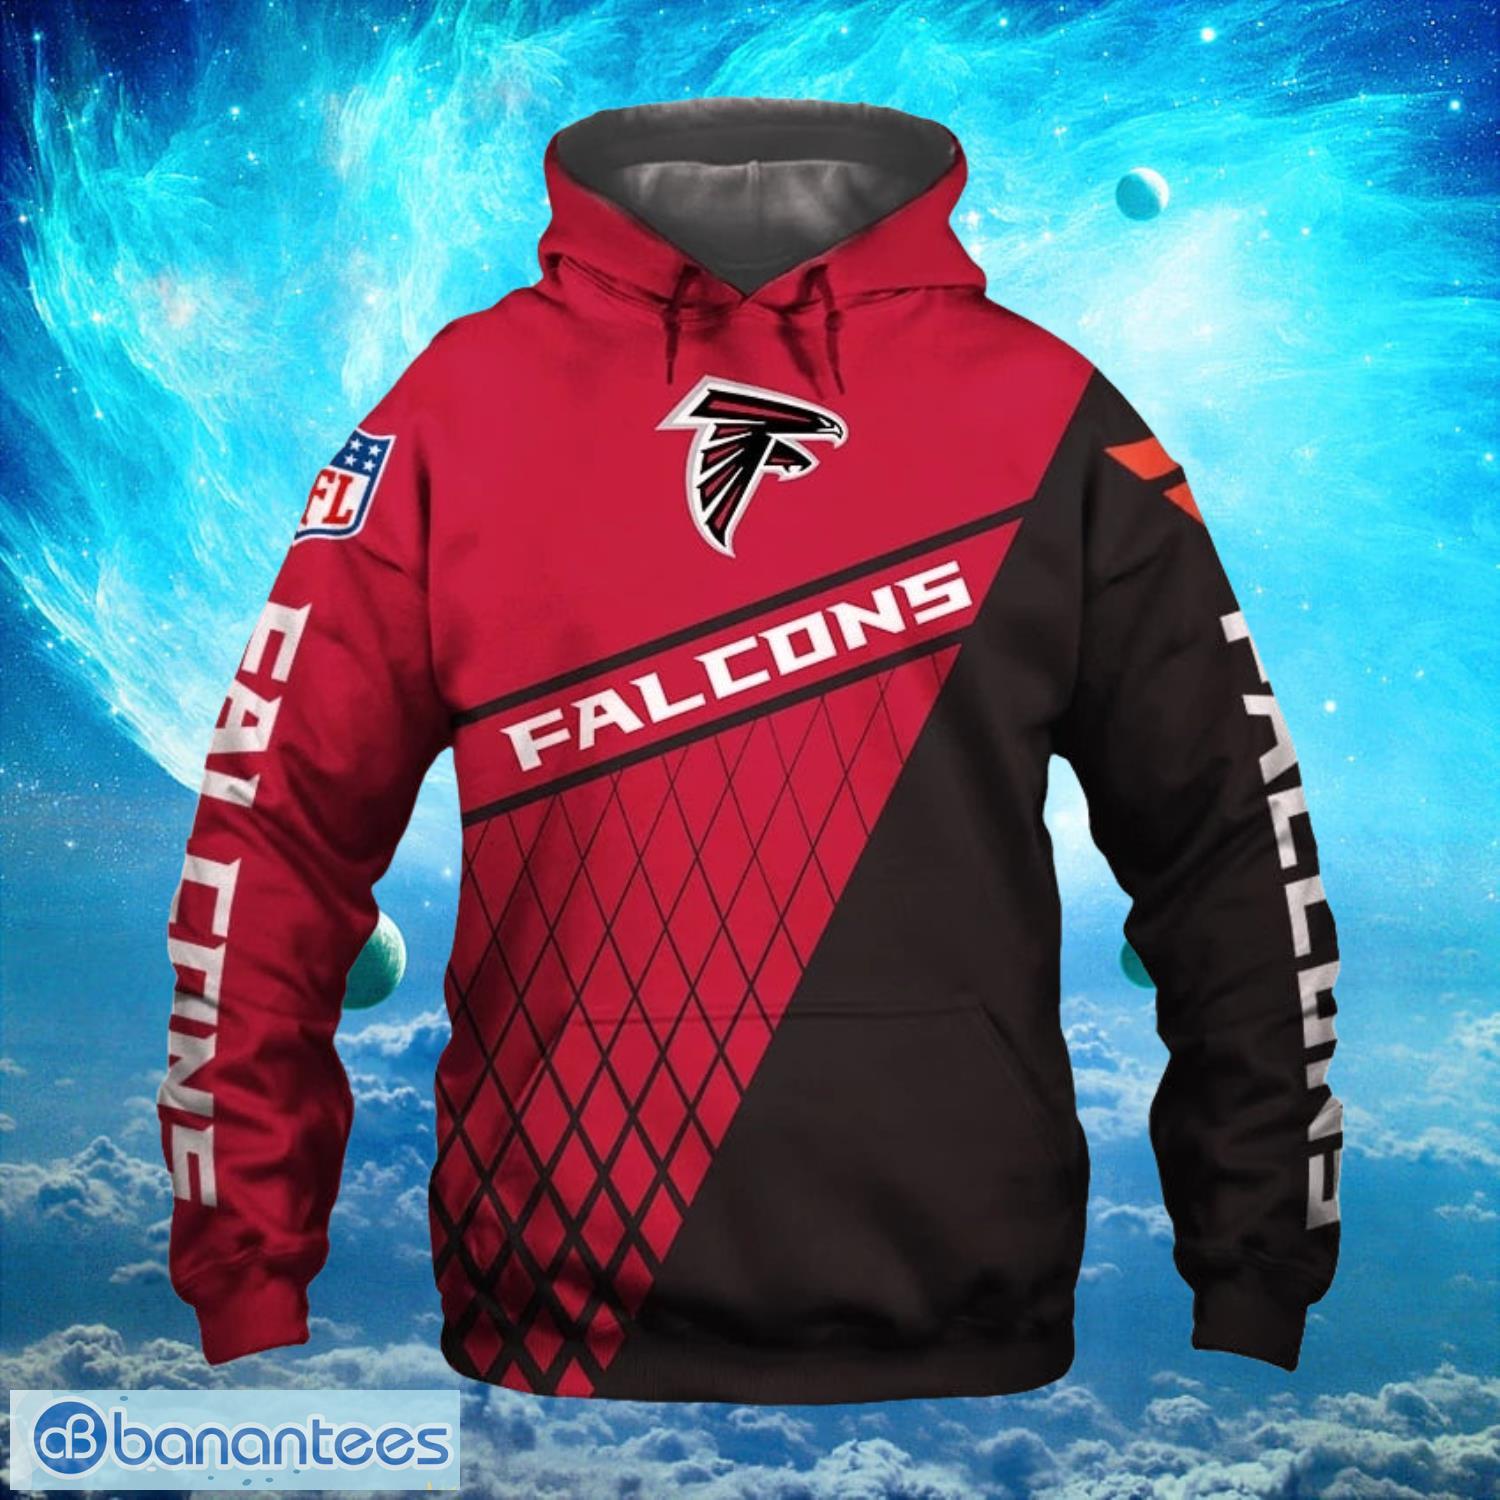 Atlanta Falcons Zip Up Red Background Hoodies Full Over Print Product Photo 2